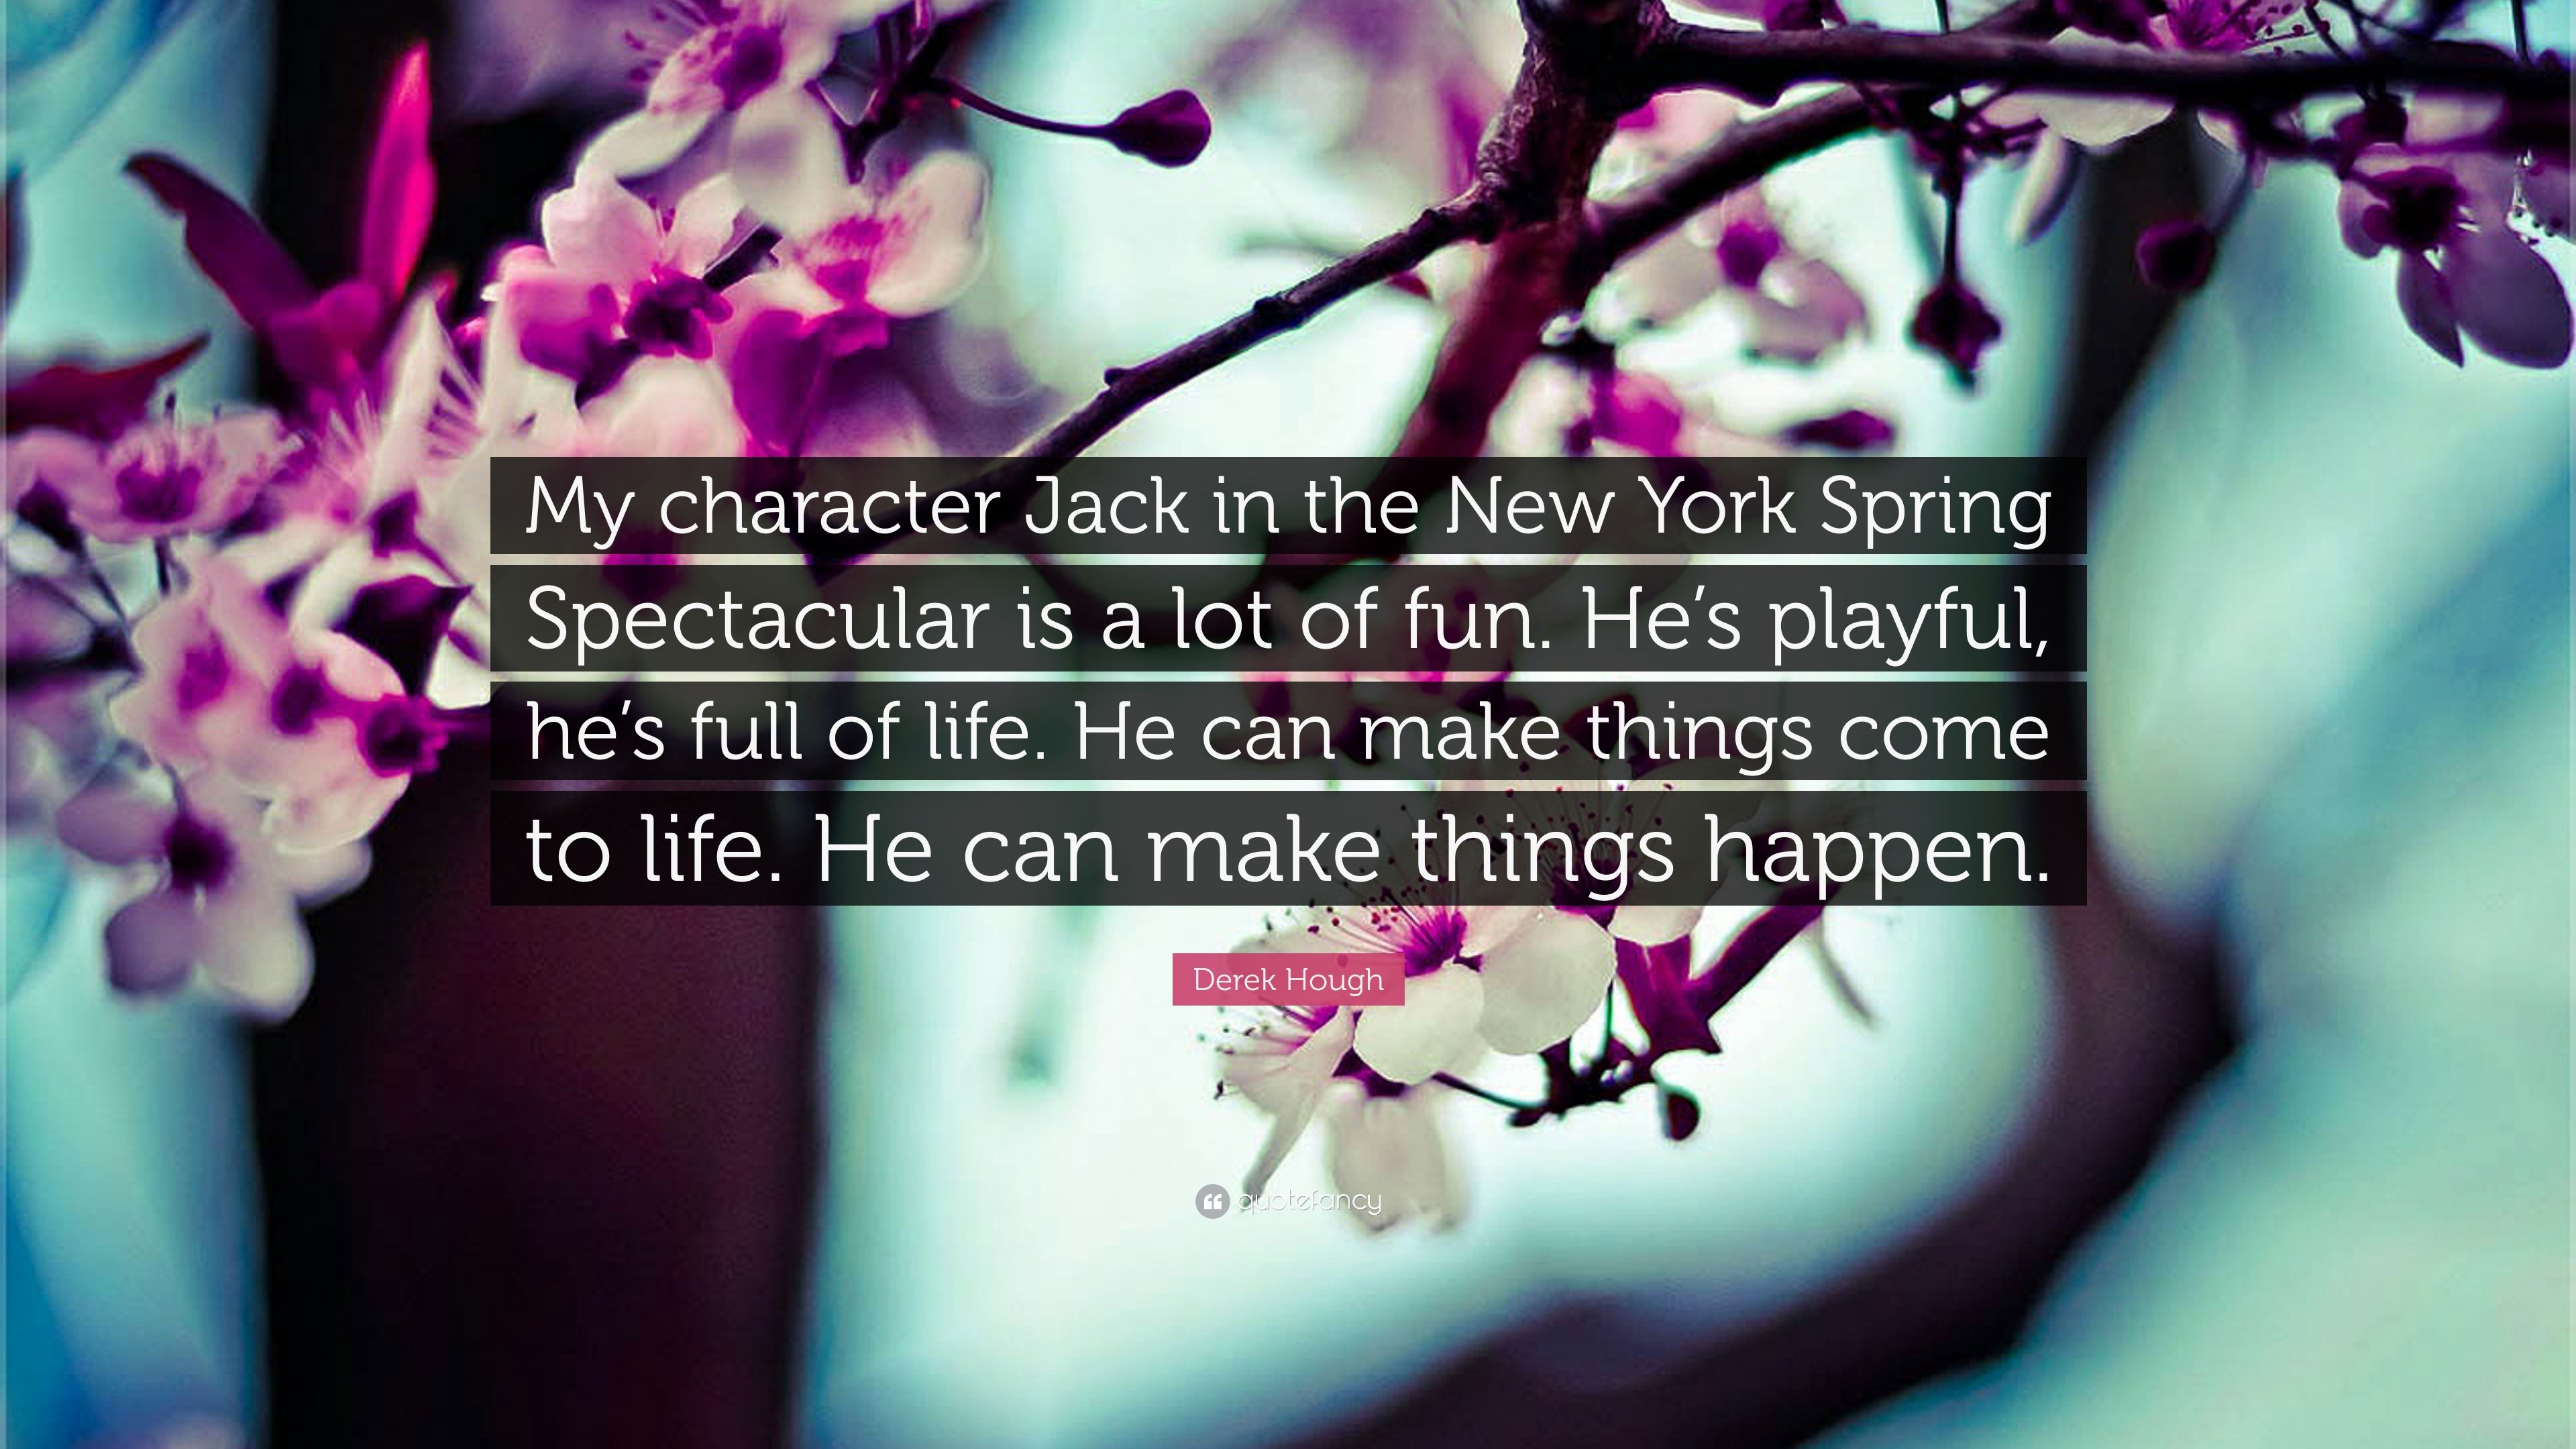 Derek Hough Quote: “My character Jack in the New York Spring